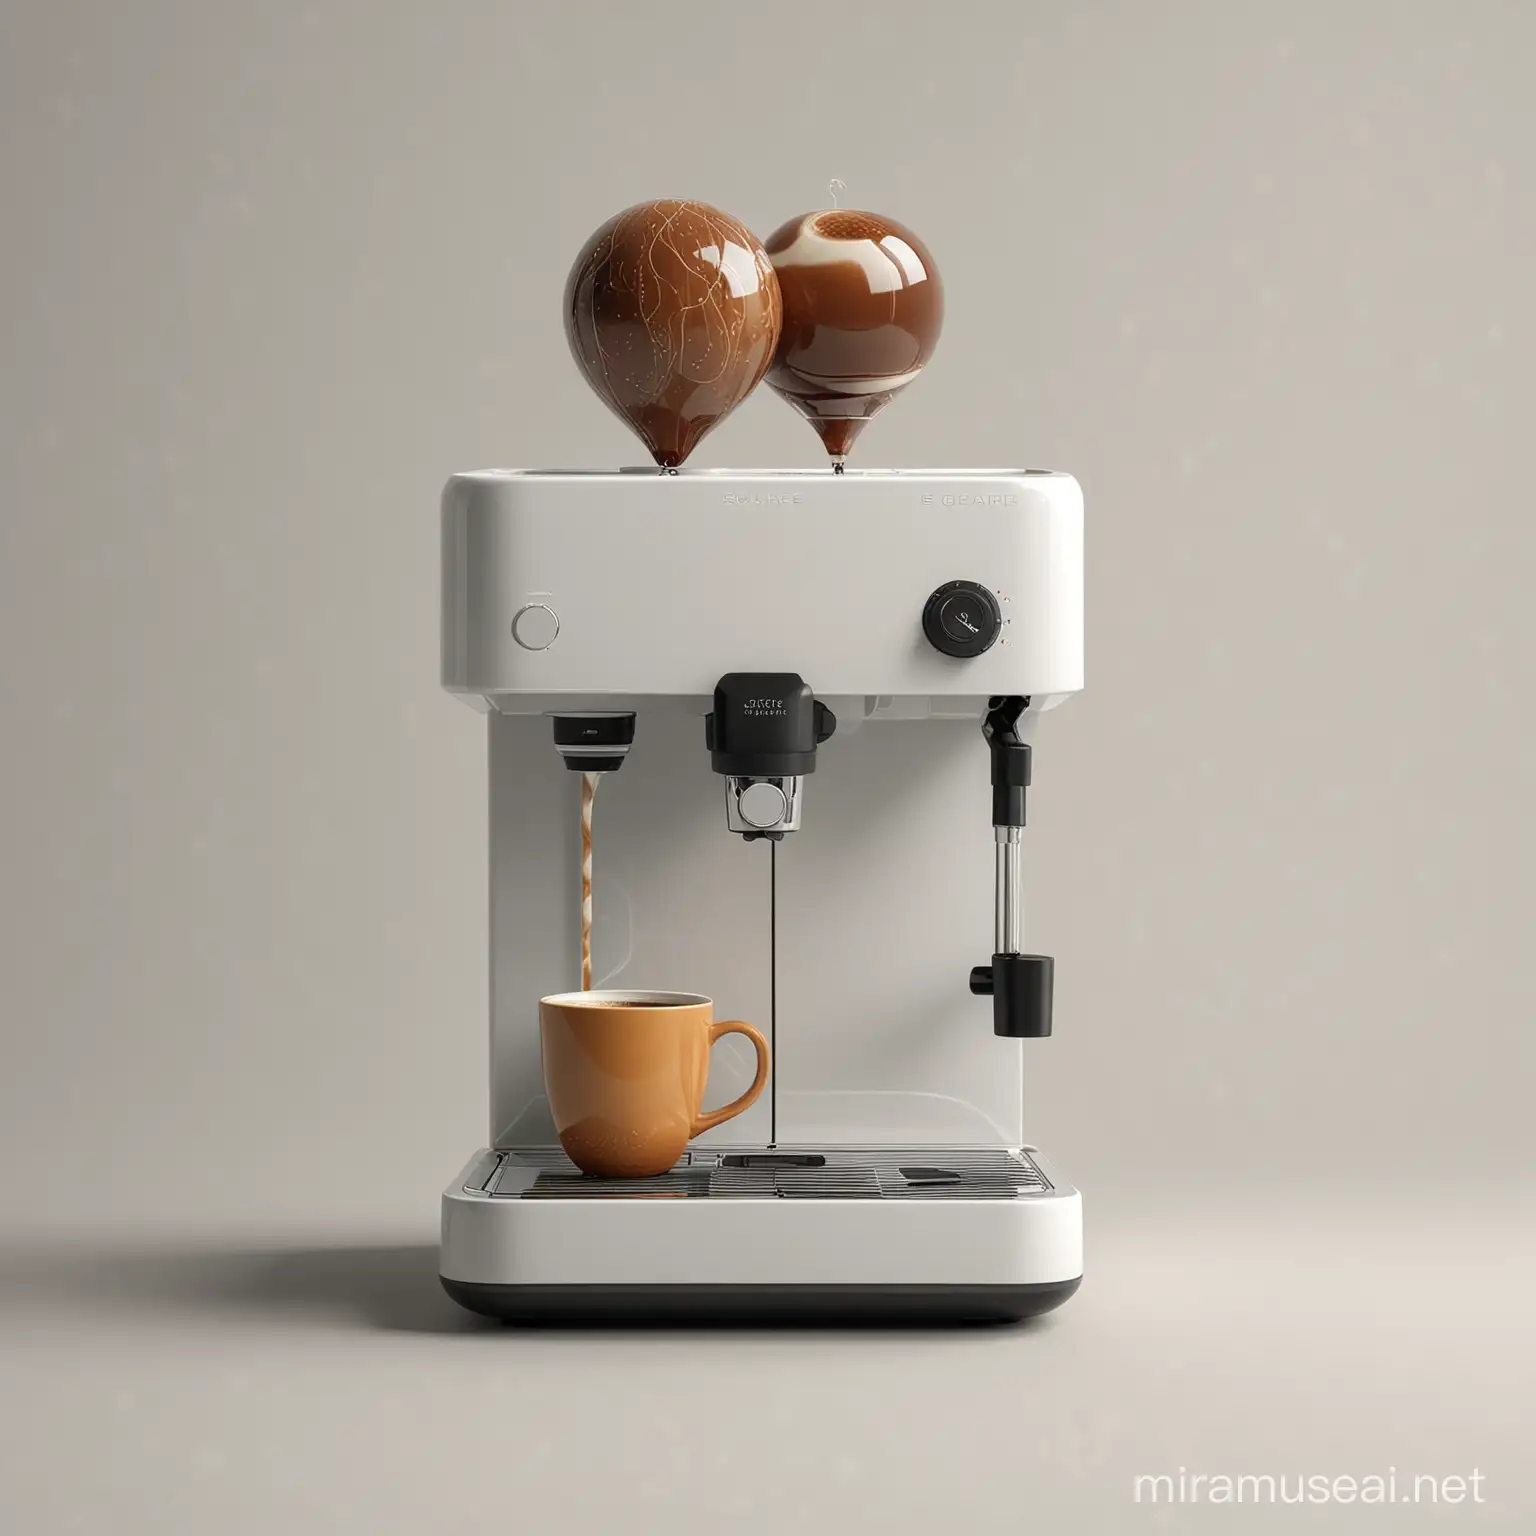 Create a different format coffee machine like square, a balloon etc.